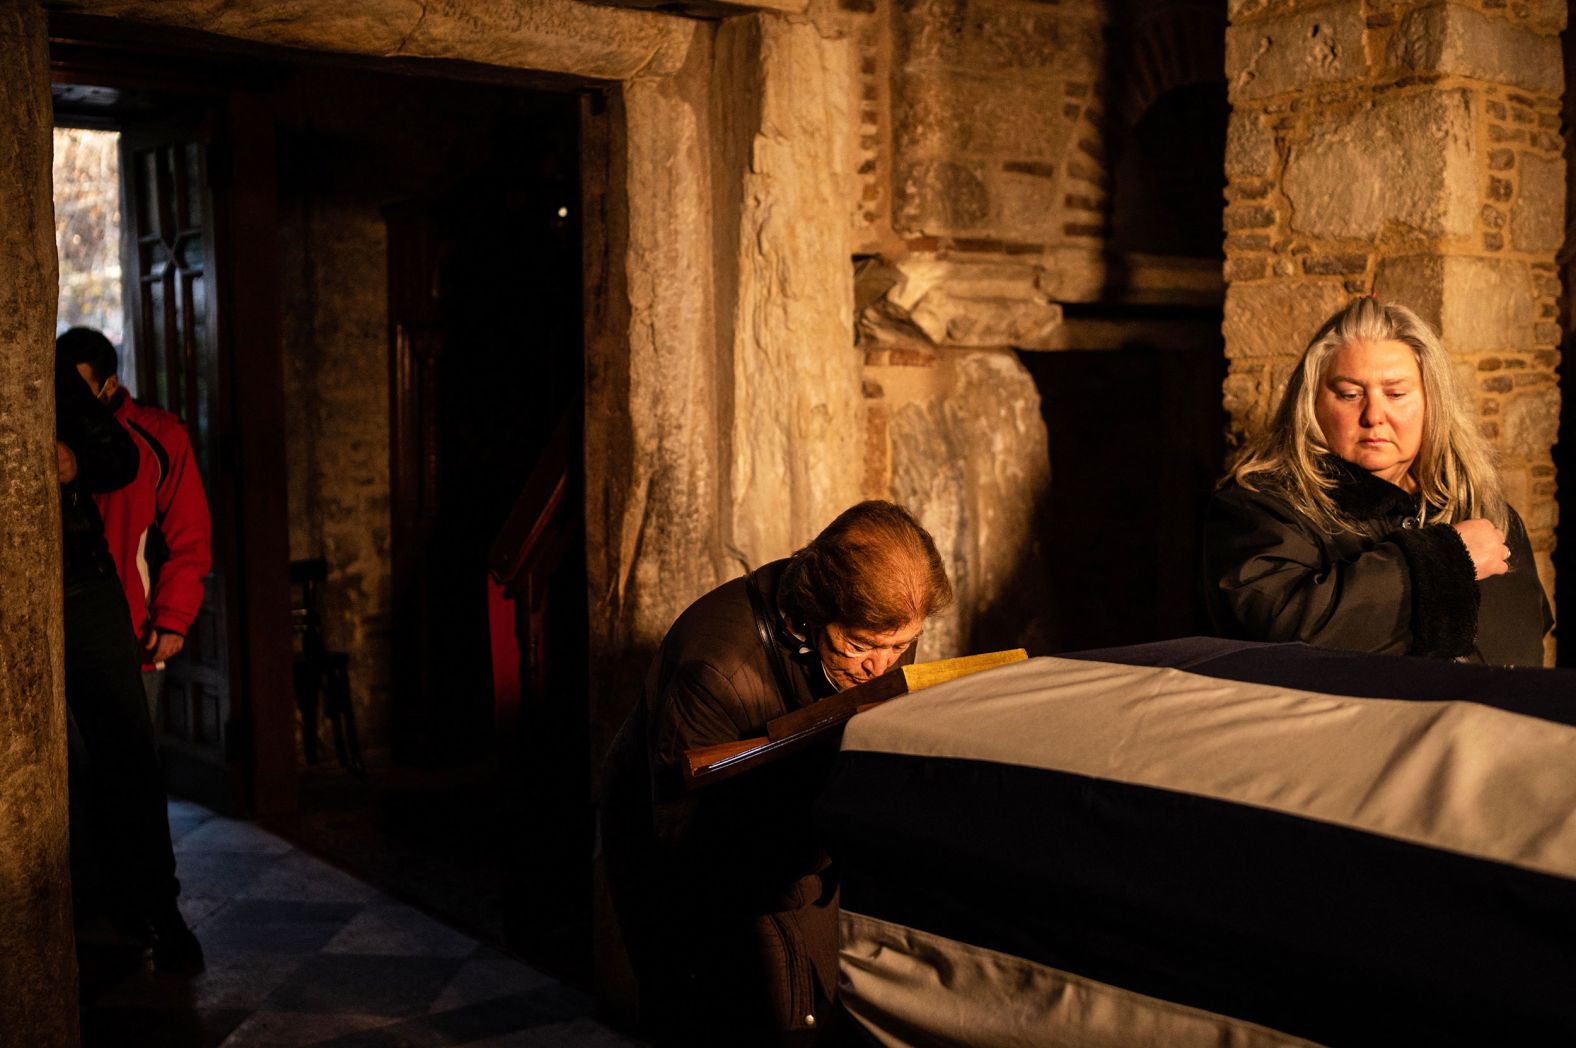 A mourner pays her respects to the former King of Greece, Constantine II, at Saint Eleftherios chapel in Athens on Monday, January 16. CNN affiliate CNN Greece reported on Tuesday that the former King had experienced serious health problems in the past few months and recently contracted <a href="https://www.cnn.com/videos/world/2023/01/10/china-reopens-borders-covid-restrictions-wang-intl-cprog-vpx.cnn" target="_blank">coronavirus</a> for the second time, which appeared to have significantly worsened his condition.